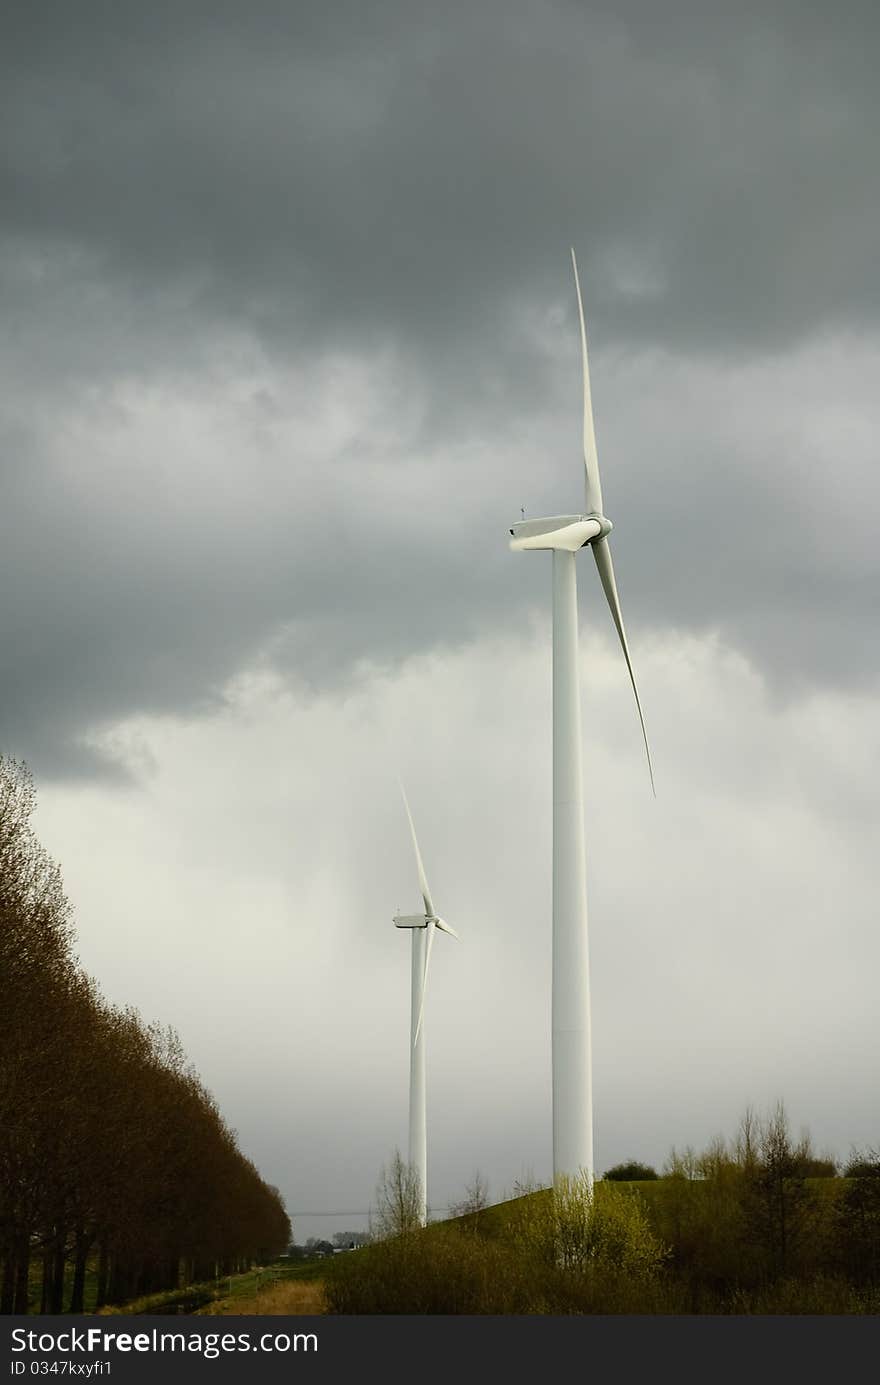 Dark clouds over renewable energy sources. Wind energy and solar energy in stormy wheather.